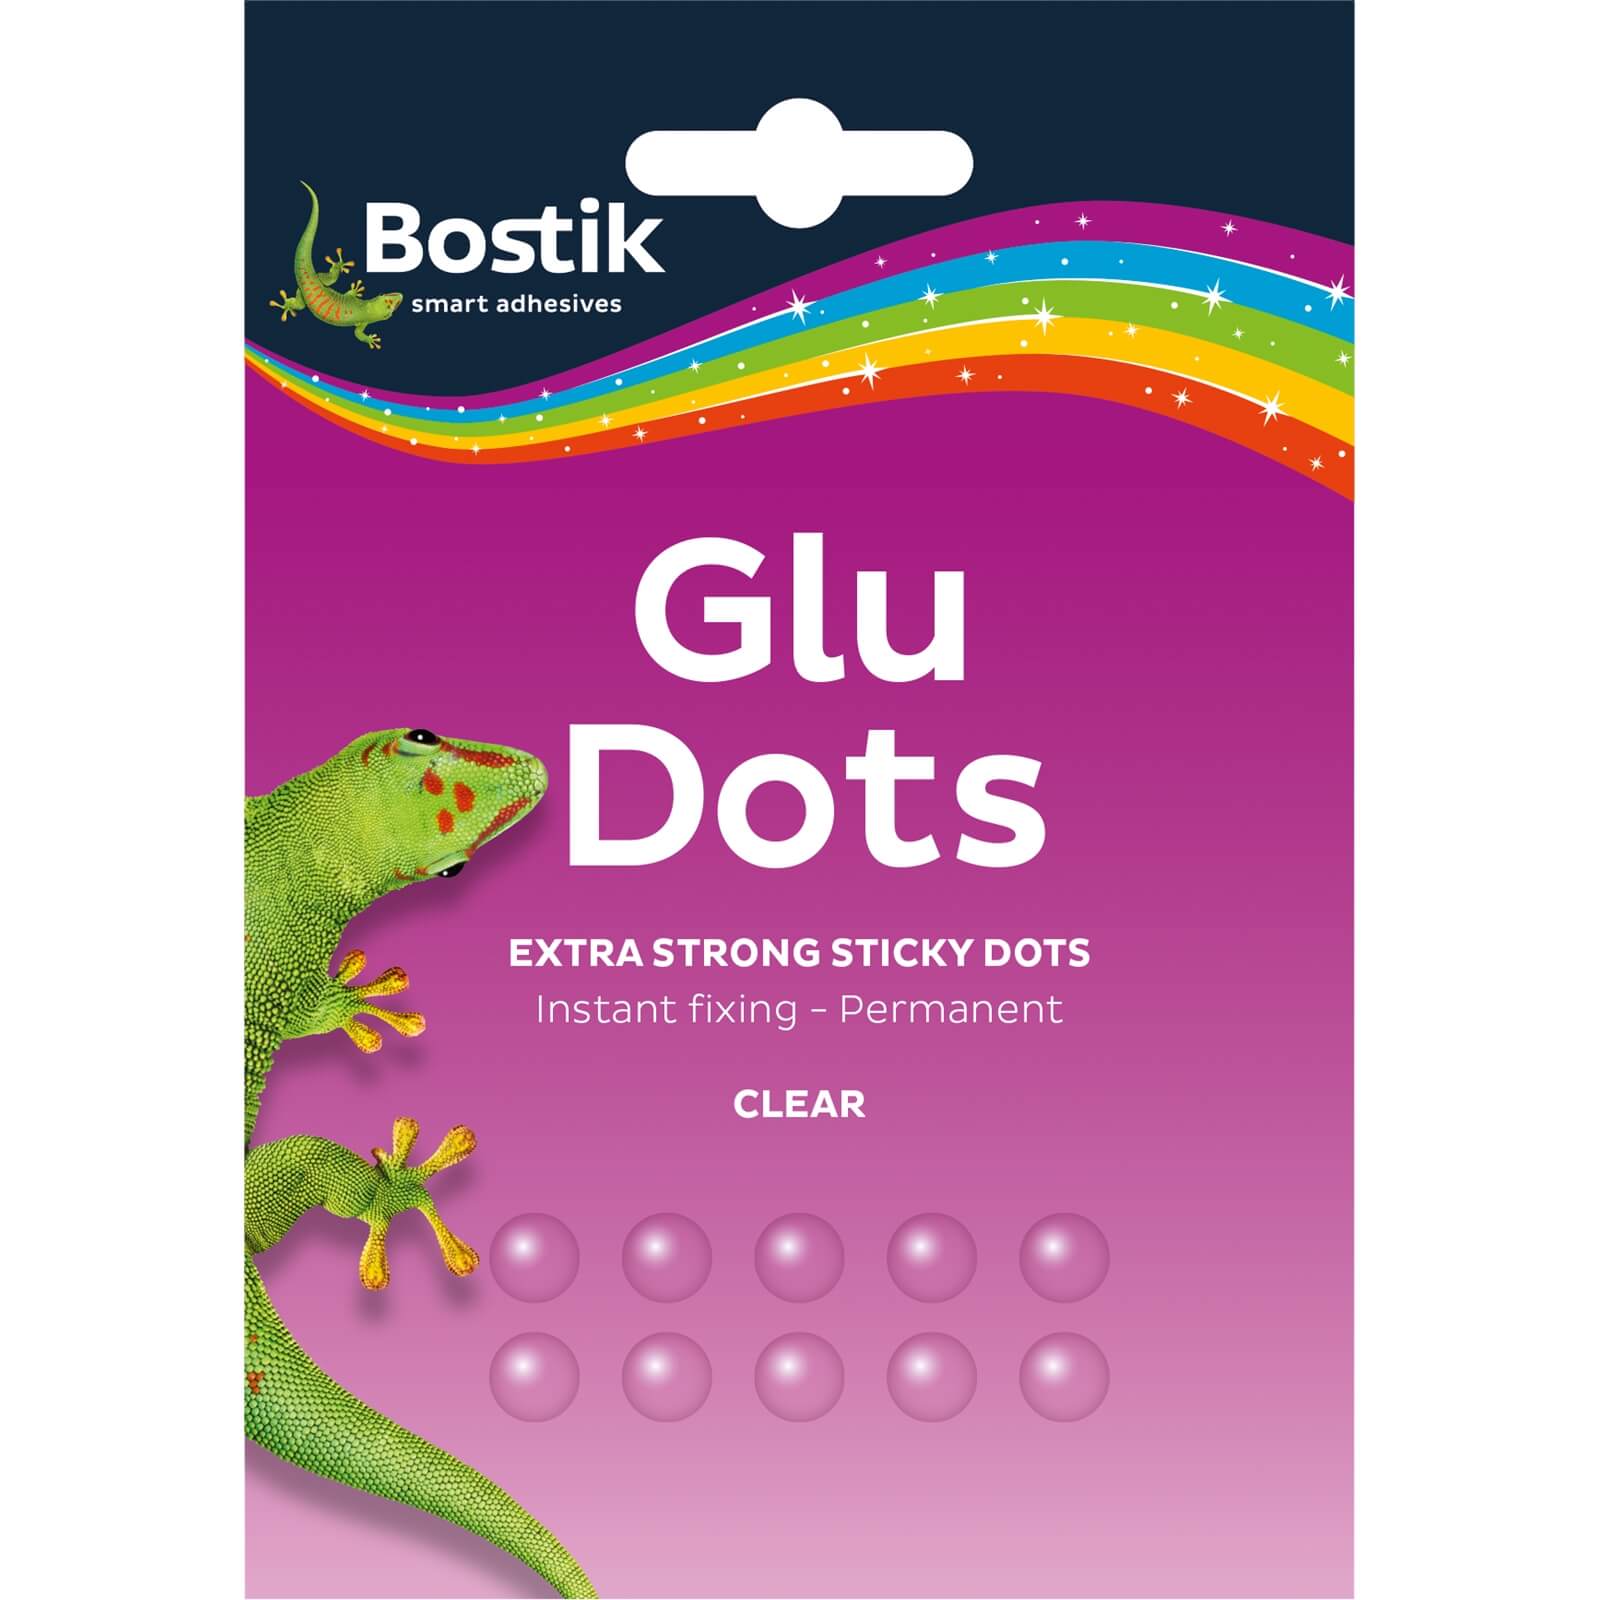 Photo of Bostik Glu Dots Extra Strong X 200